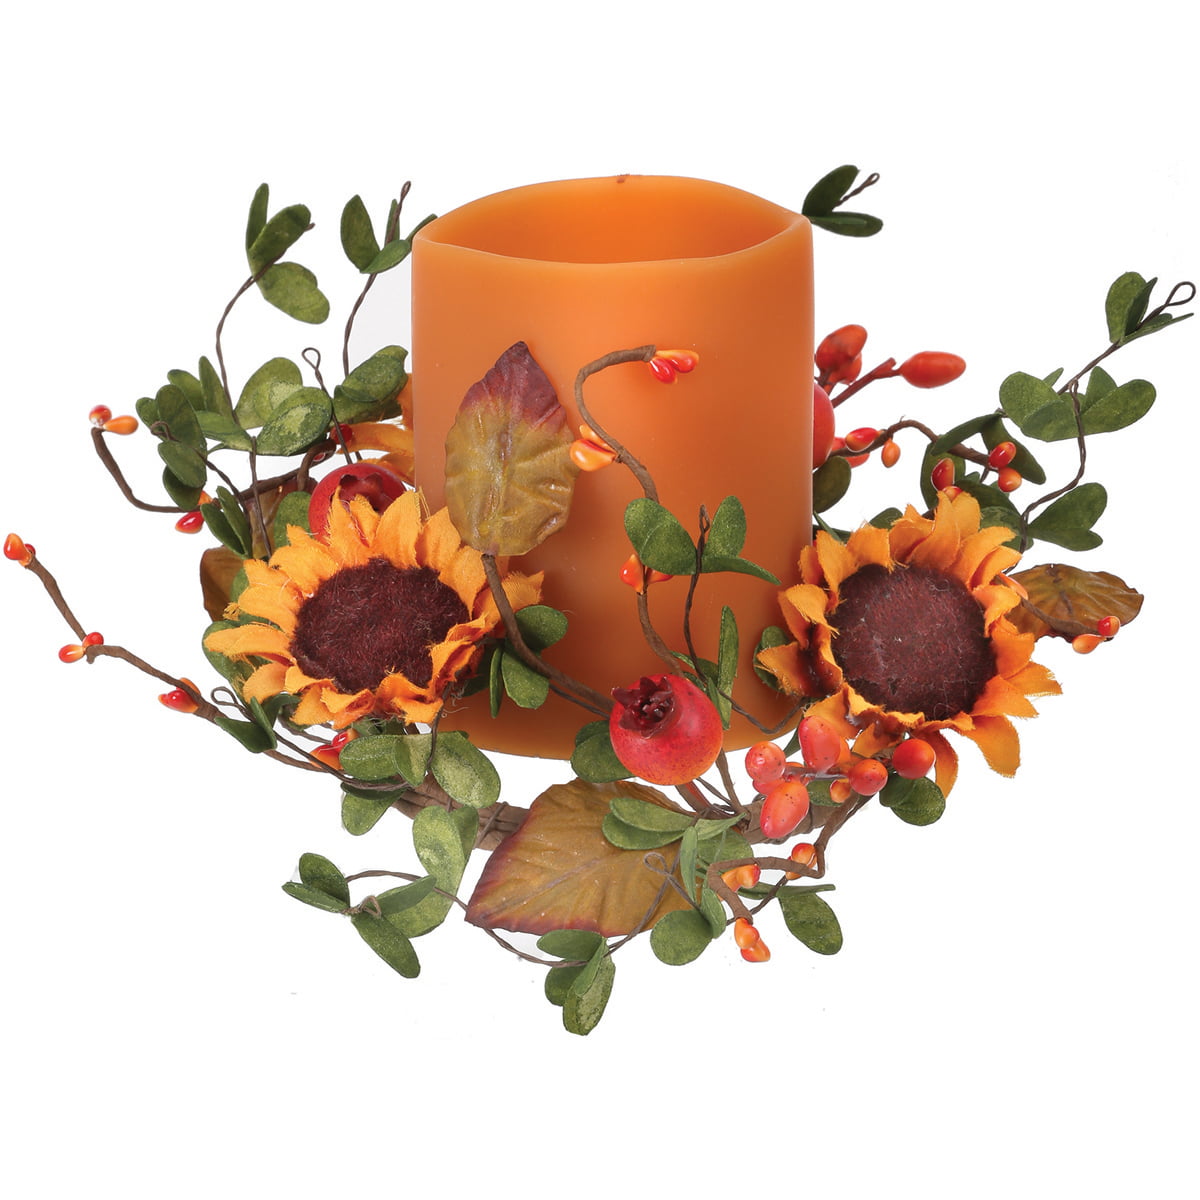 LED Pillar Candle With Sunflowers And Berries